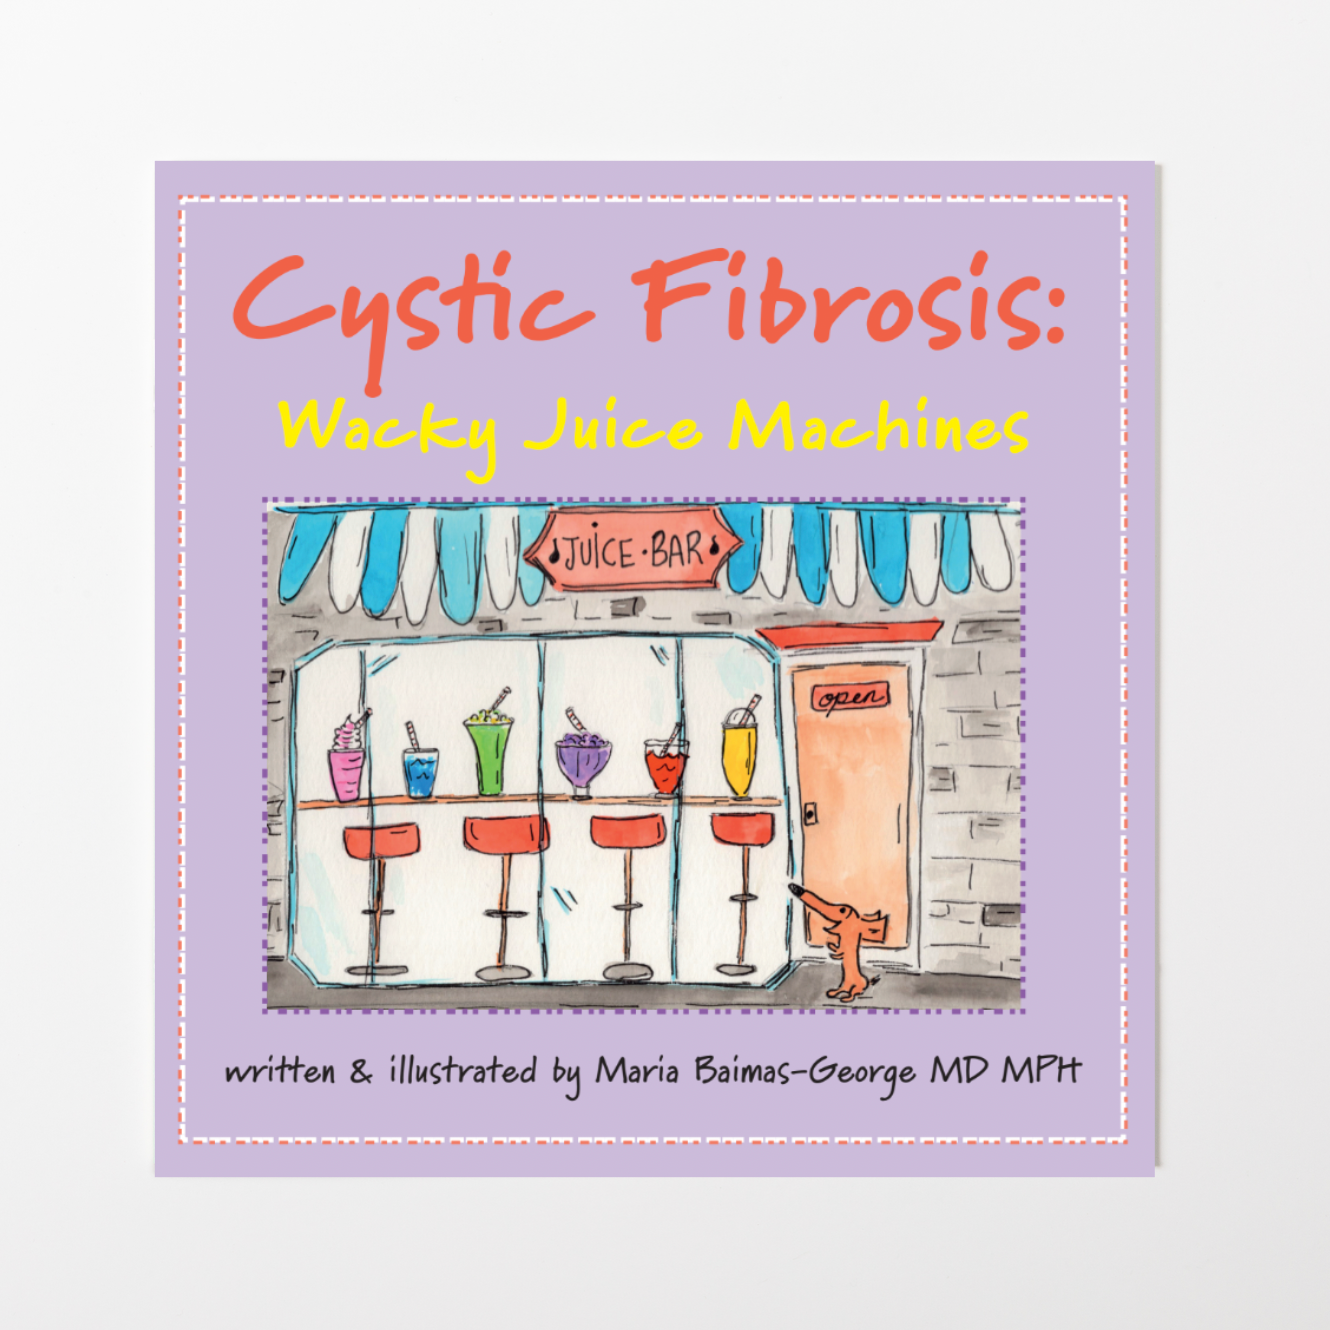 A love story on cystic fibrosis